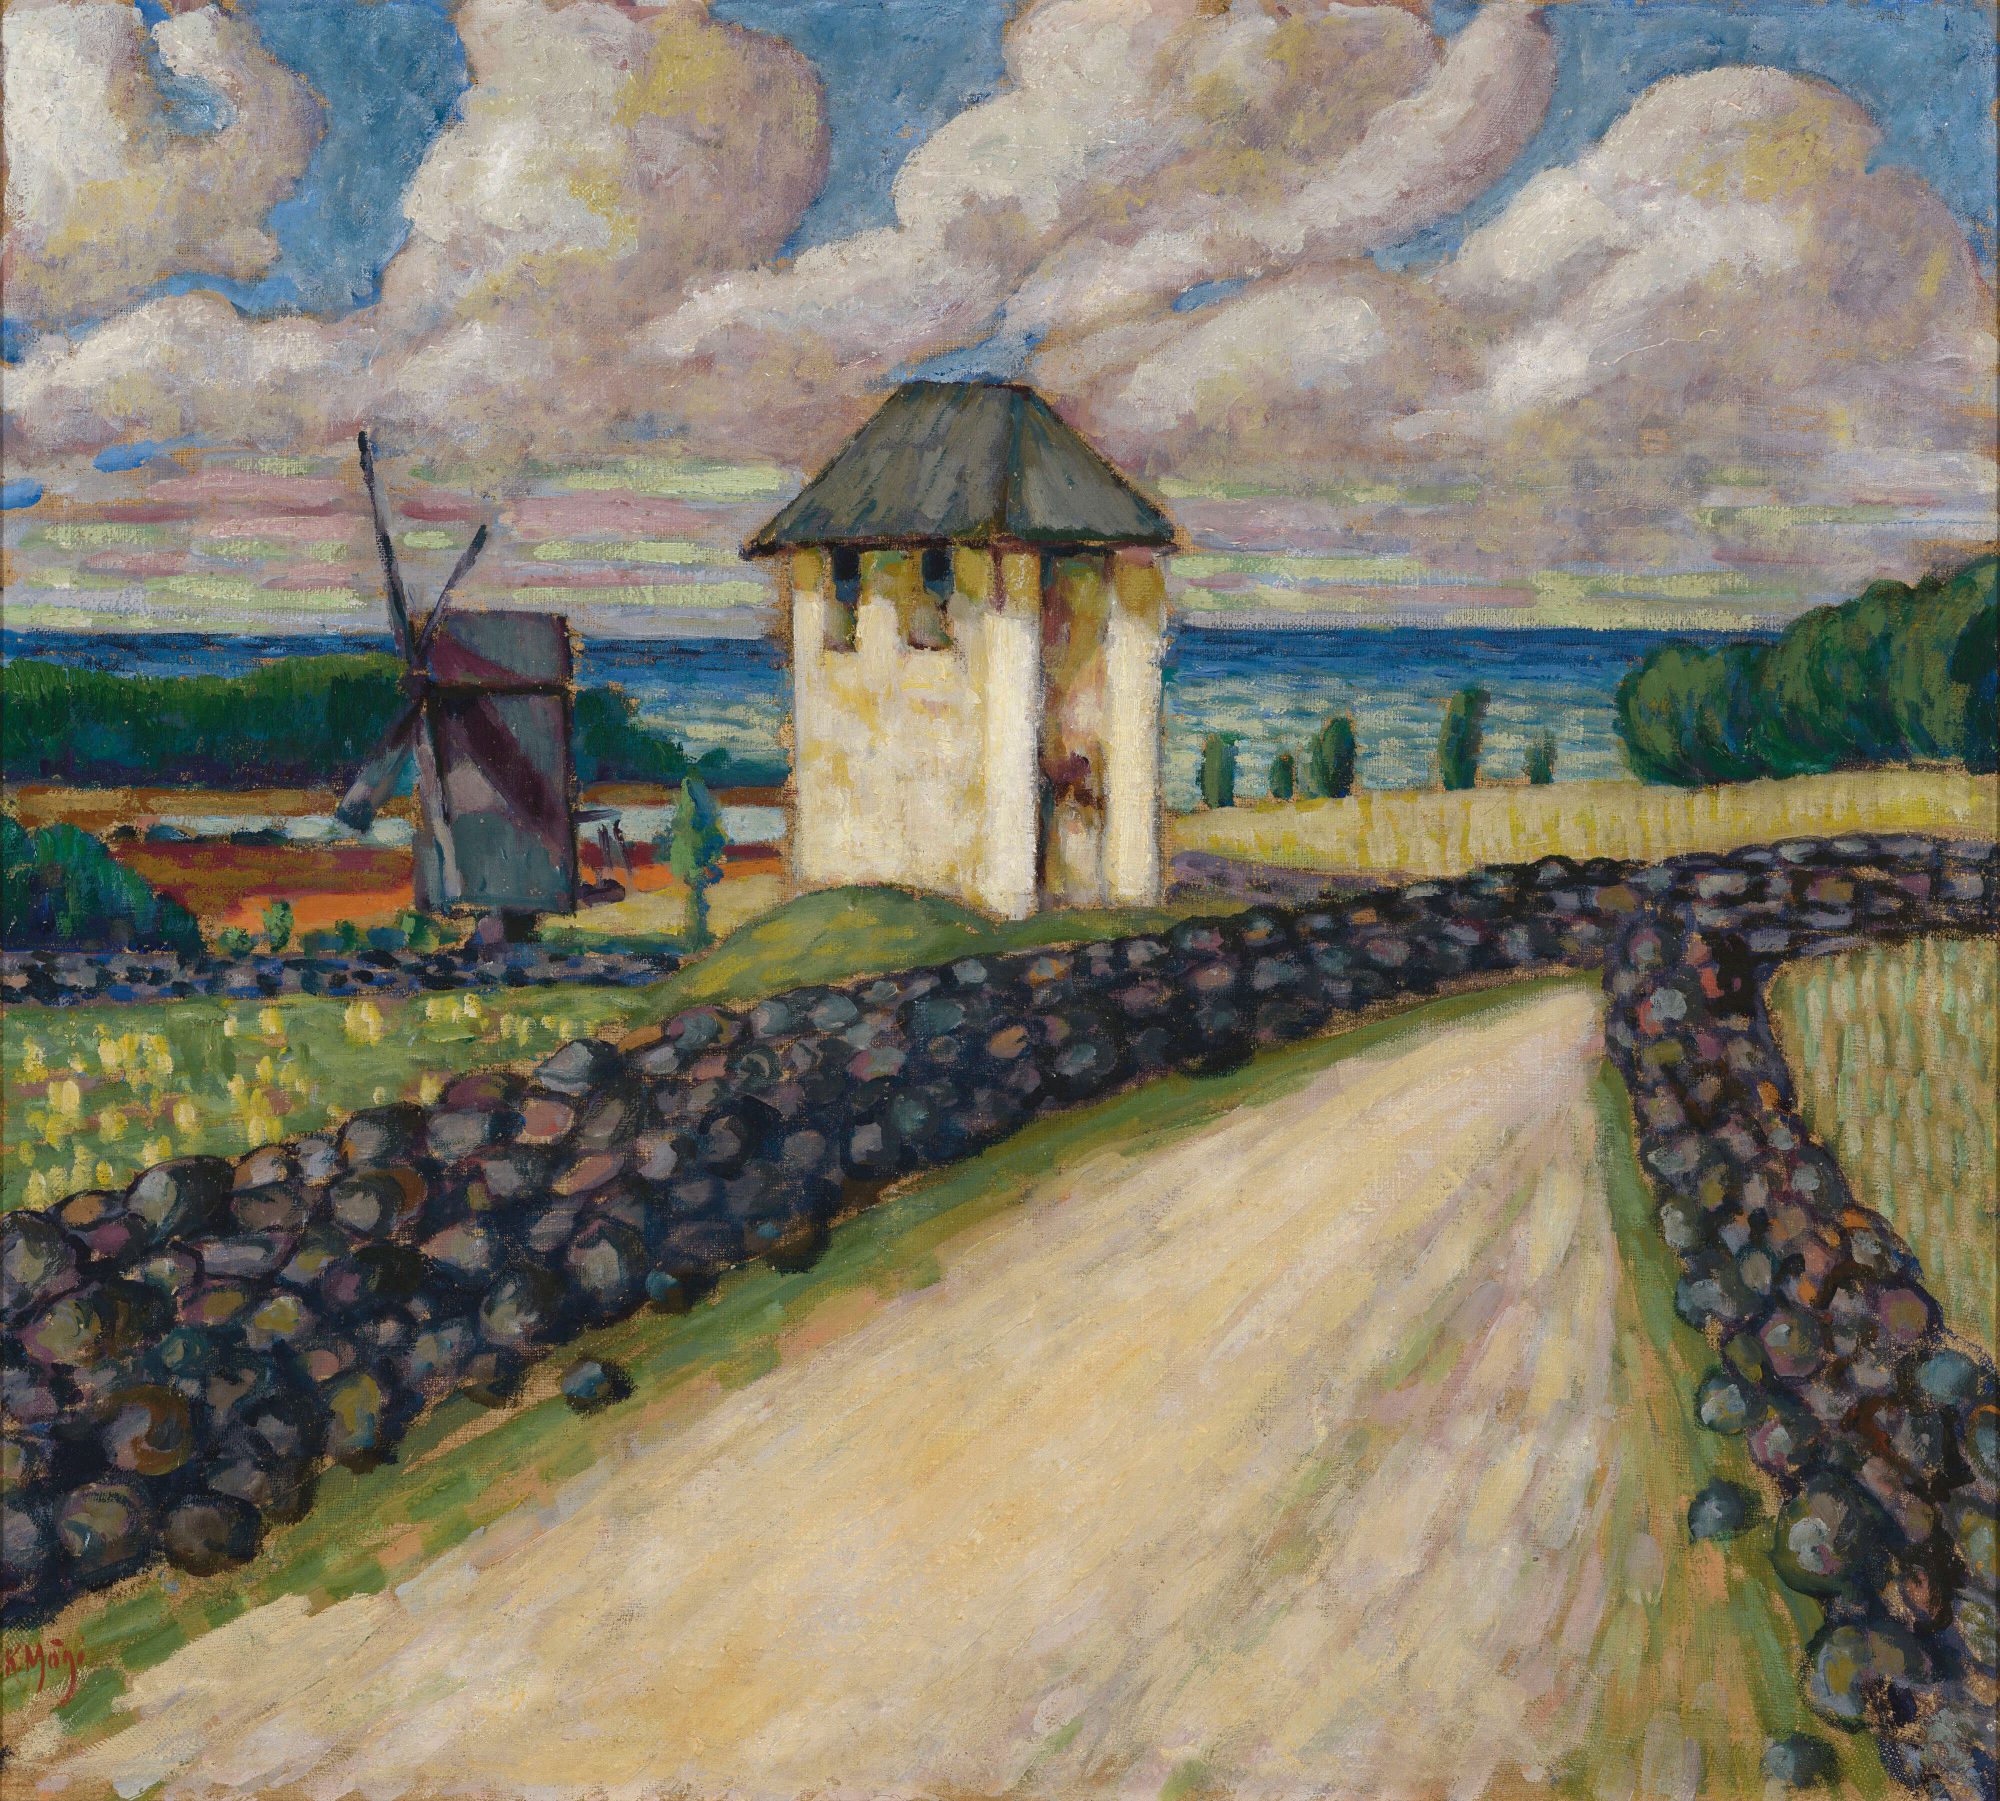 Landscape with a Bell Tower (Kihelkonna)